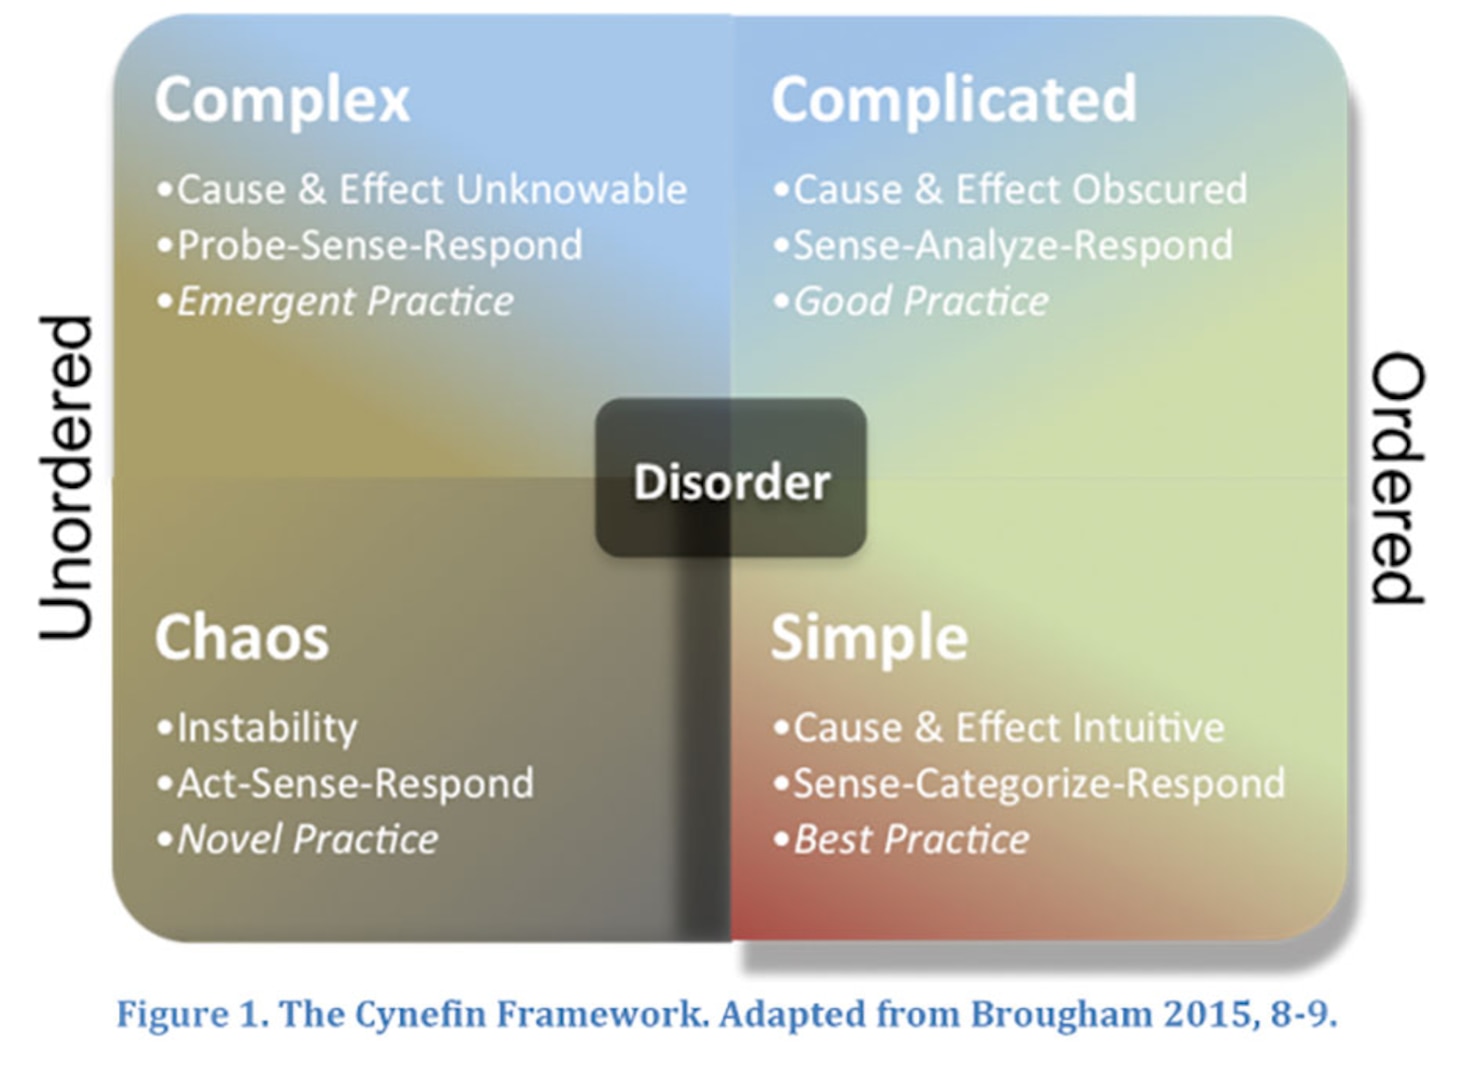 Figure 1. The Cynefin Framework. Adapted from Brougham 2015, 8-9